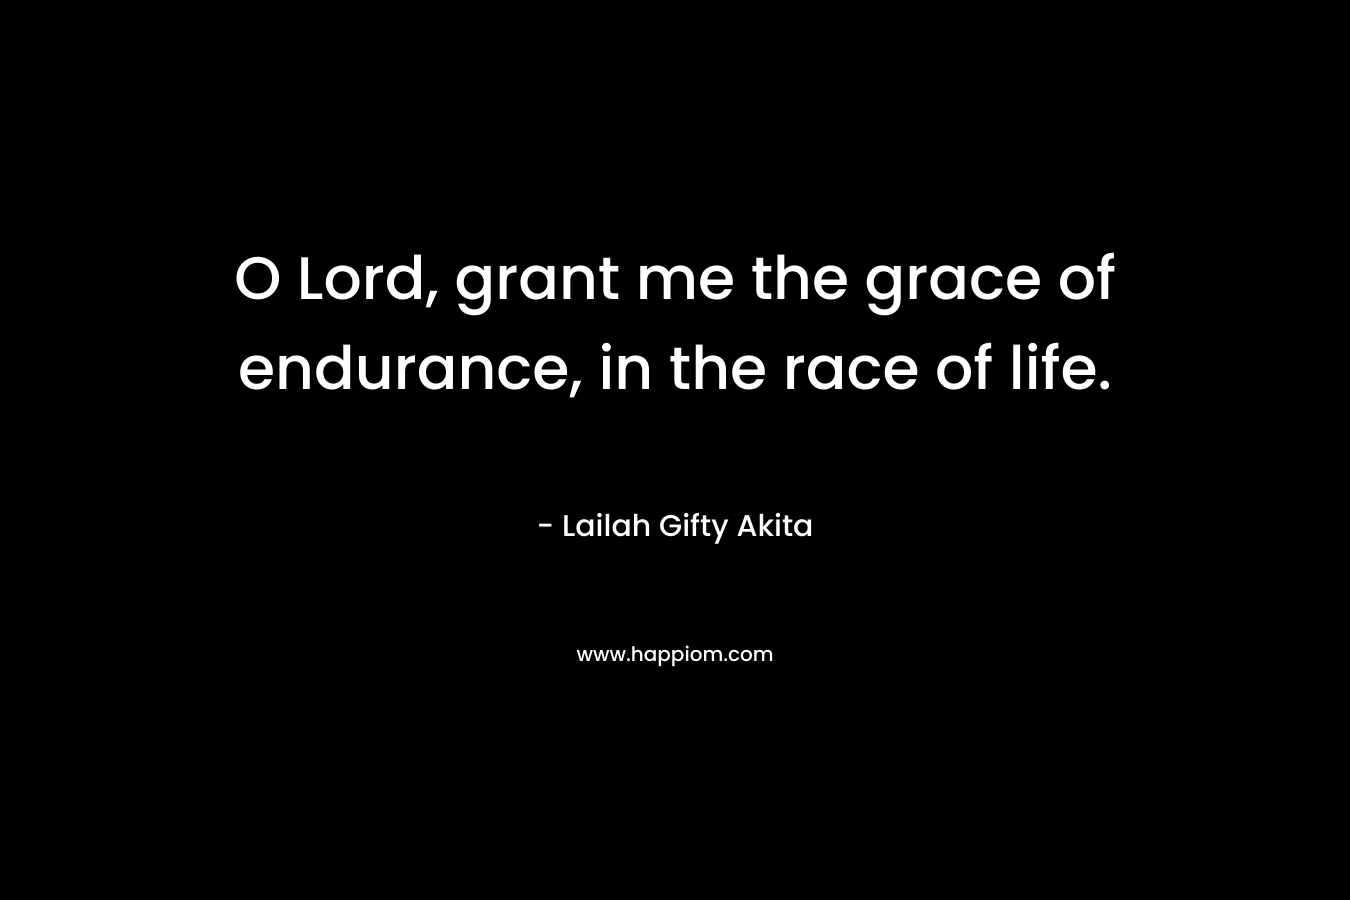 O Lord, grant me the grace of endurance, in the race of life.